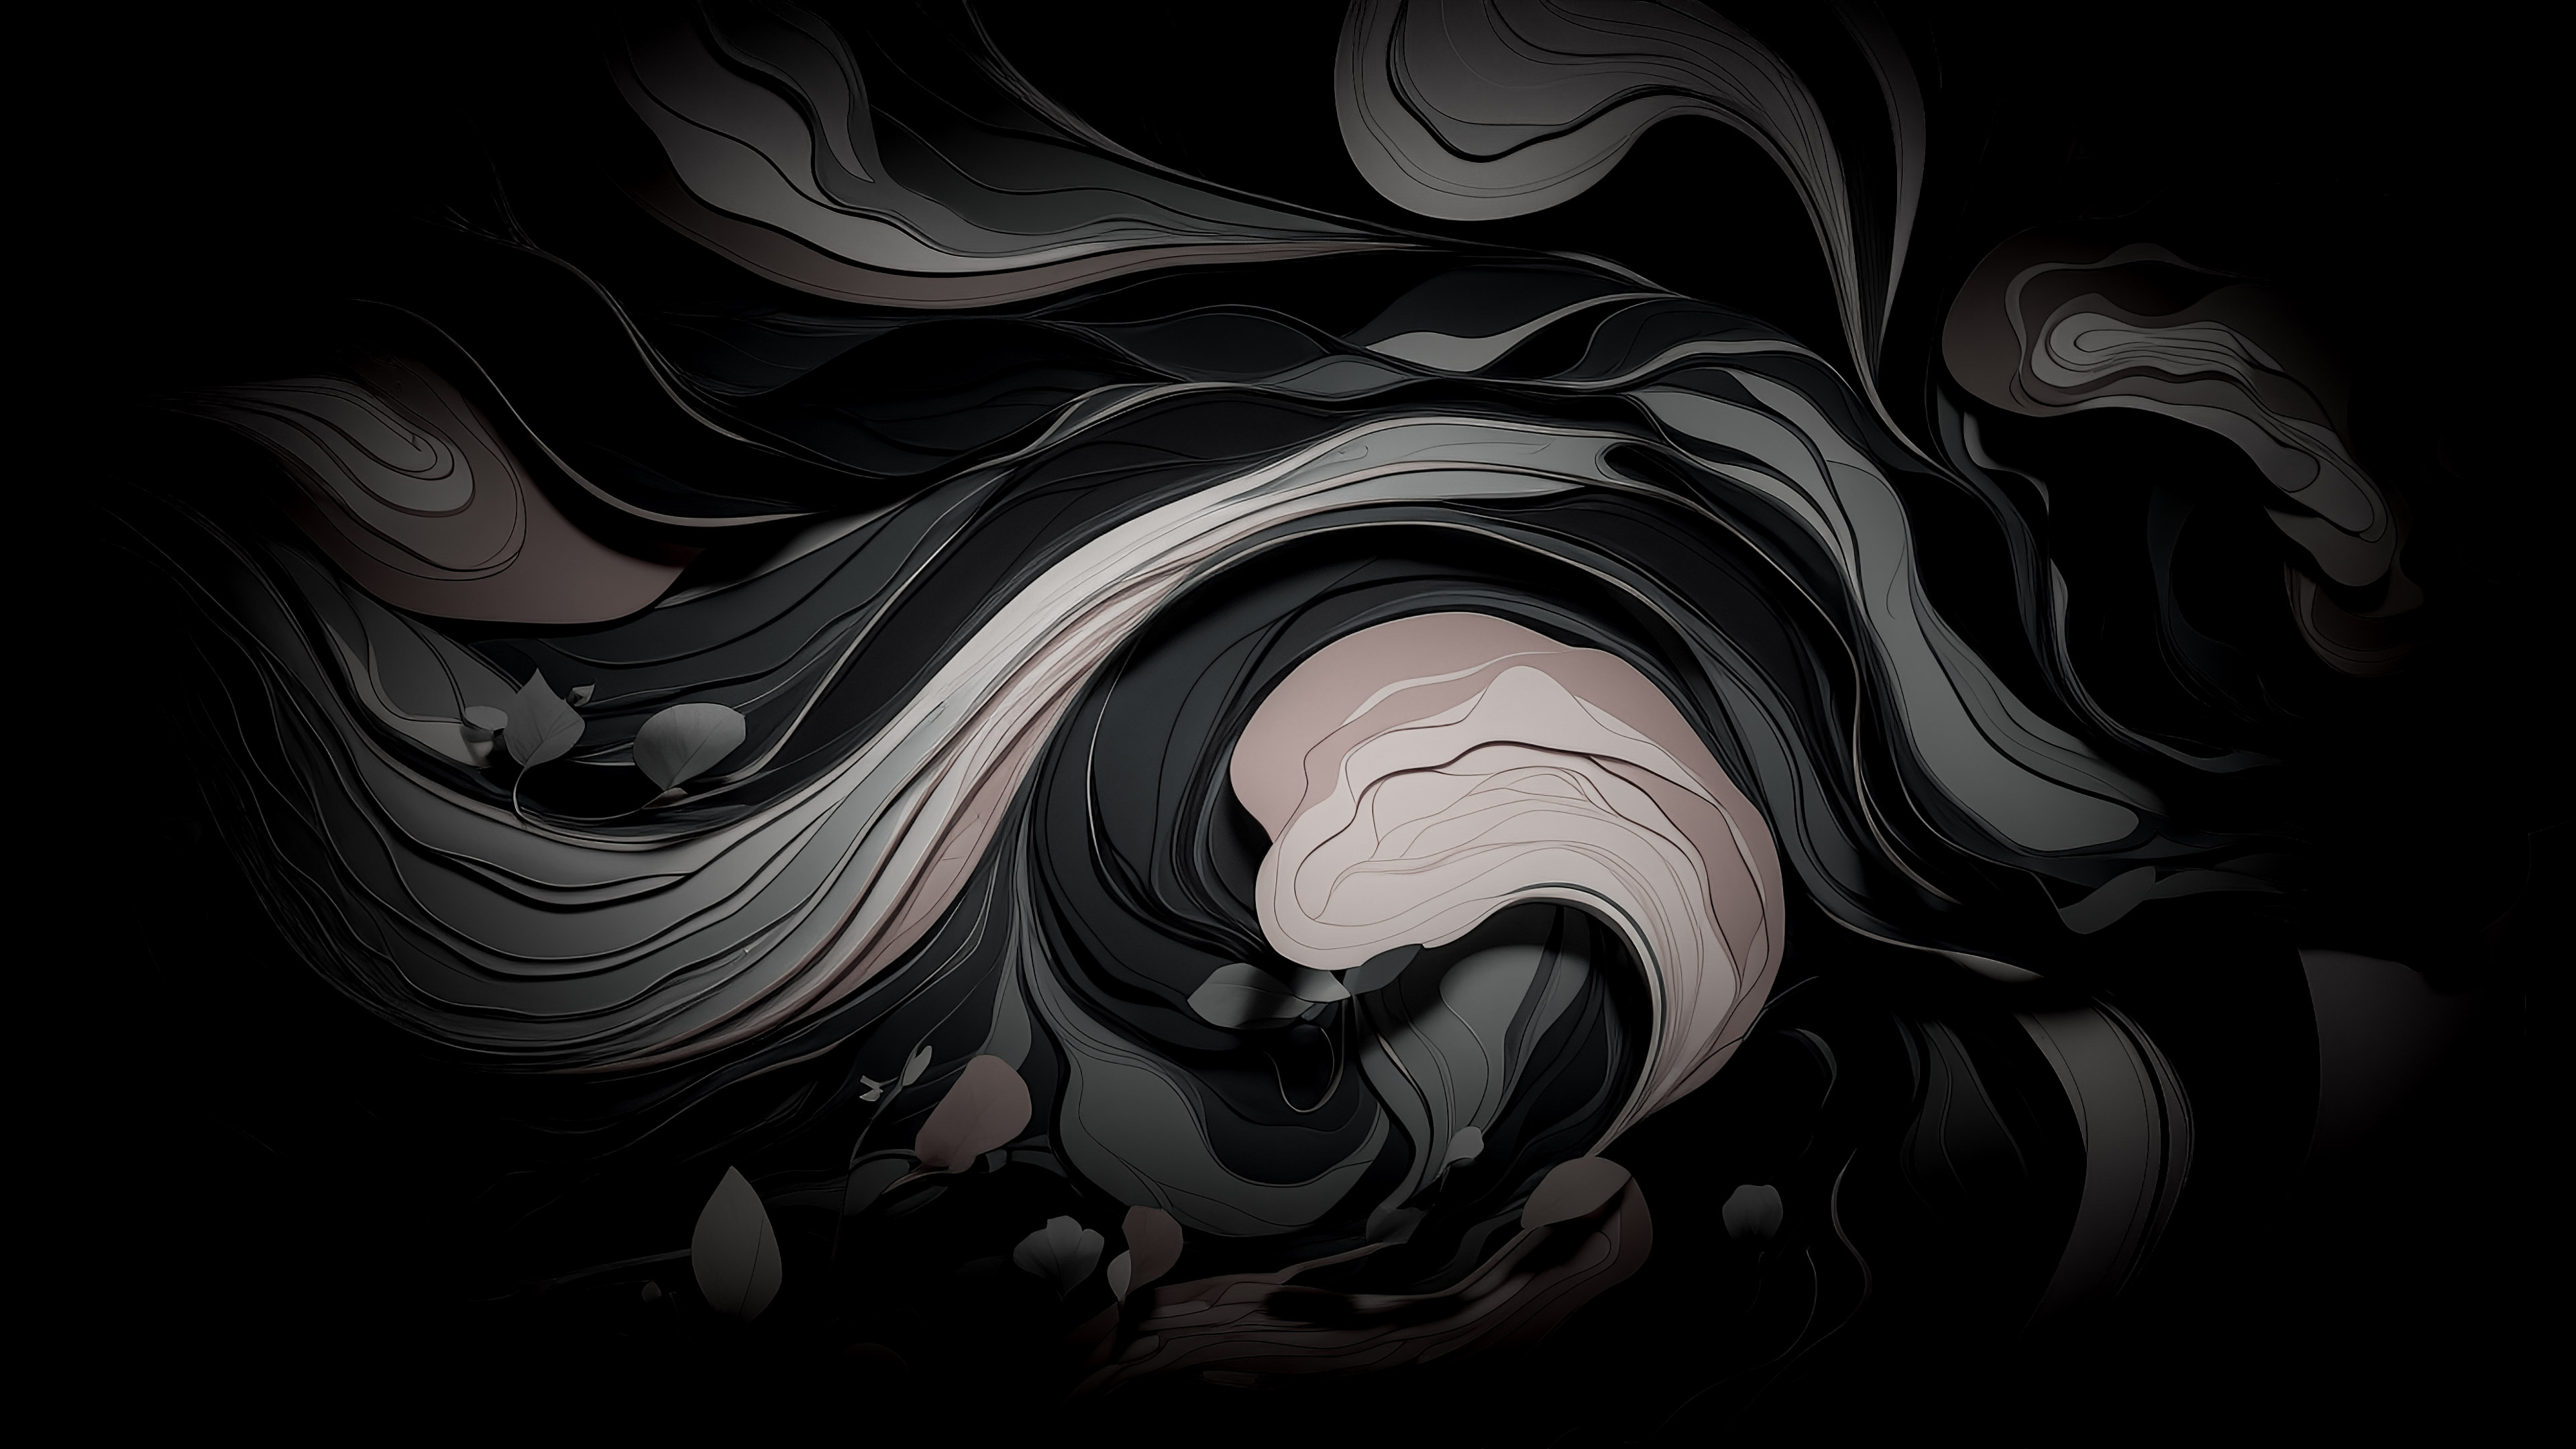 Immerse yourself in the enchanting realm of HD abstract wallpapers with a dark design inspired by nature, revealing flowing lines and organic shapes.